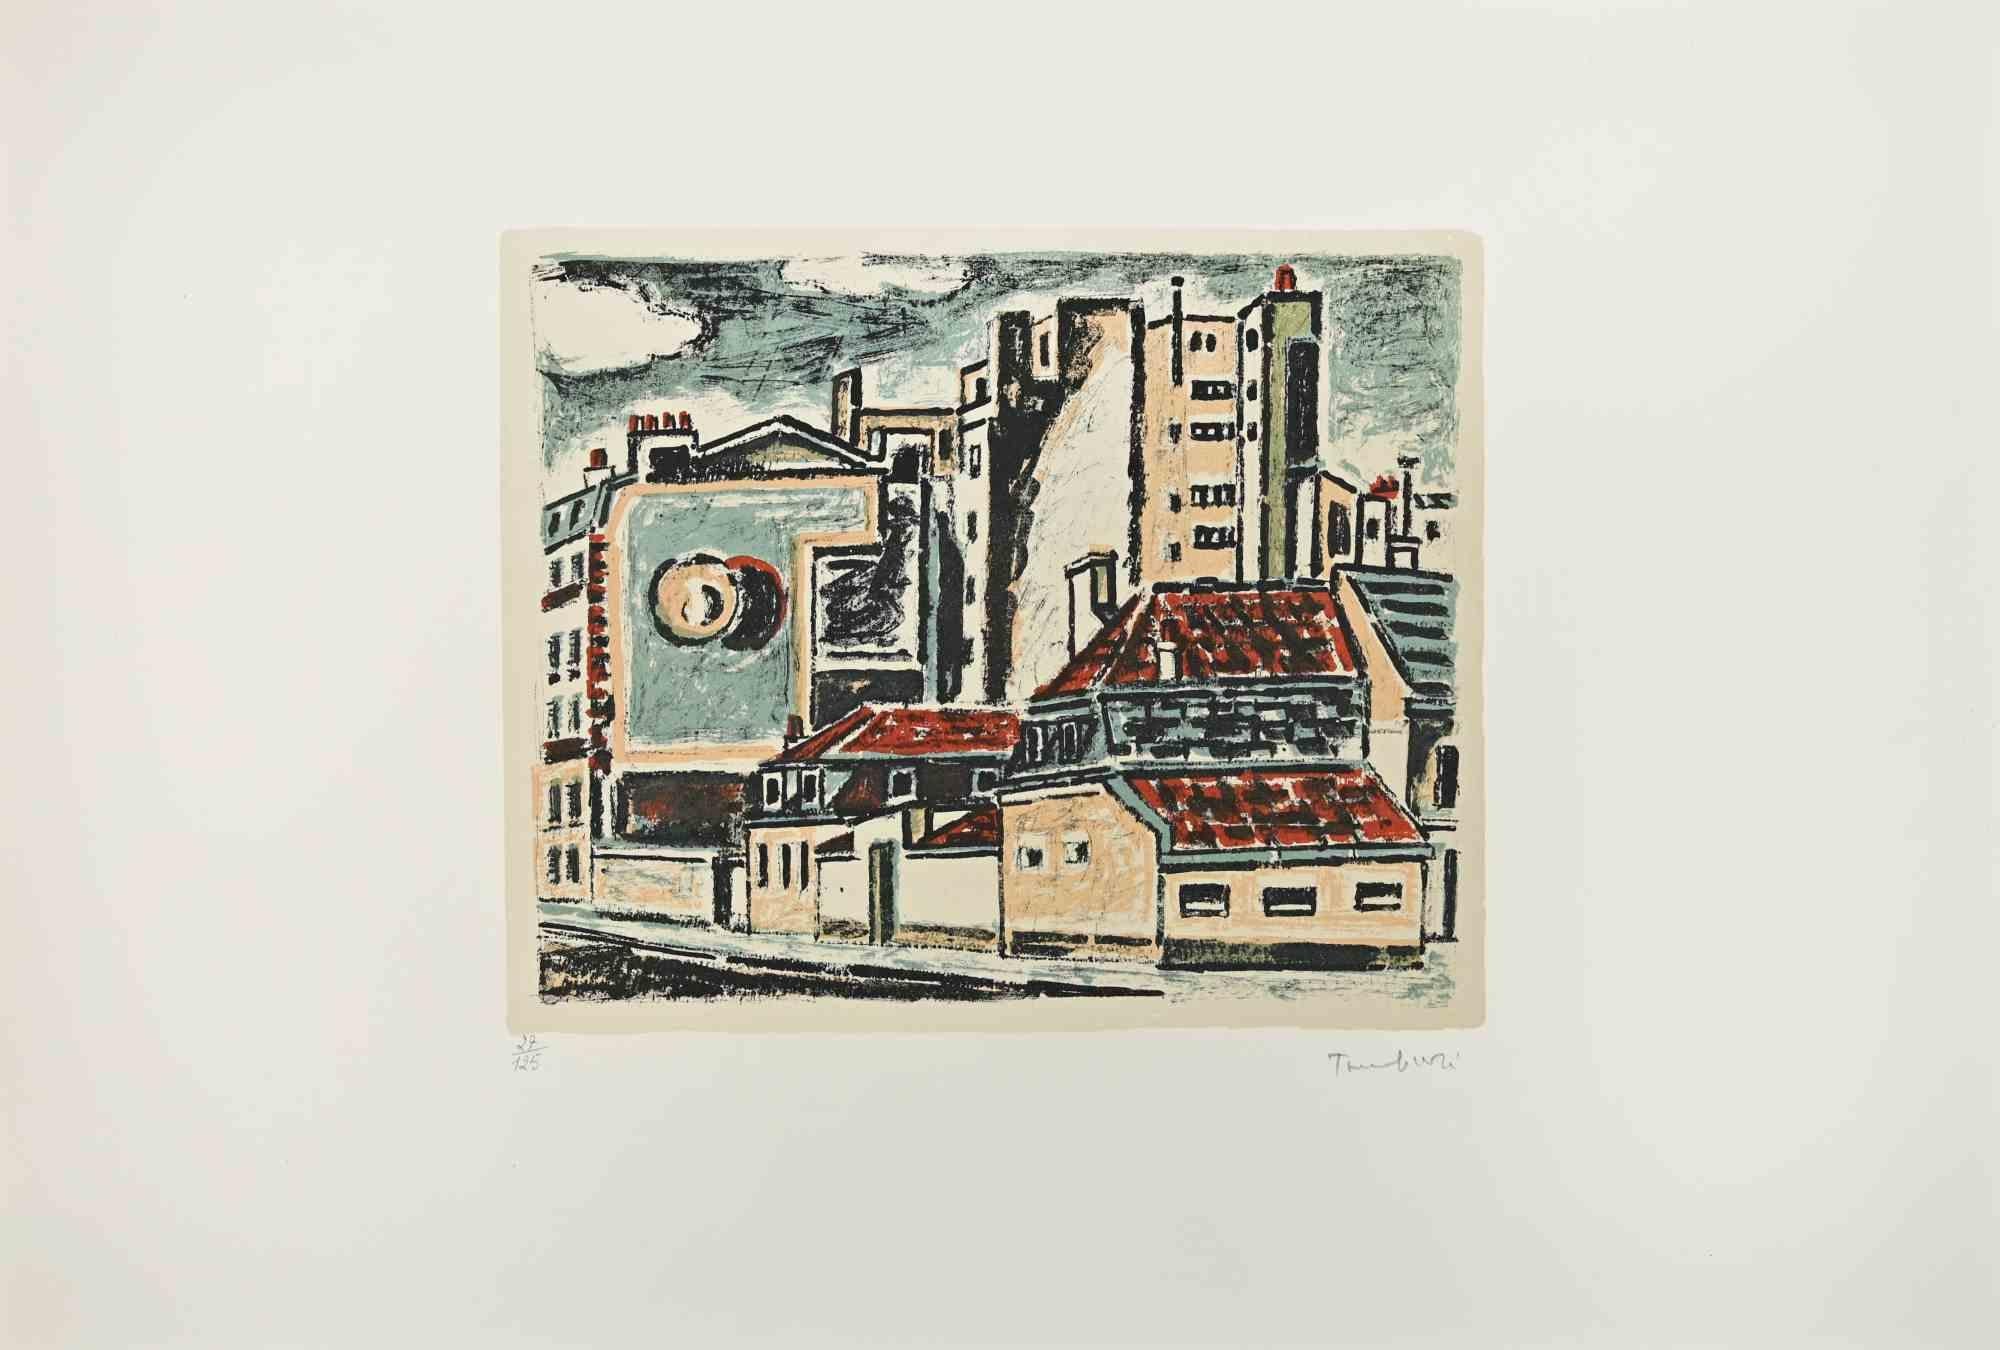 View of Paris is a Modern artwork realized by Orfeo Tamburi  (Jesi, 1910 – Paris,1994) in the 1970s. 

Colored Etching and Aquatint on paper. 

Hand-signed.

Numbered on the lower, Edition, 125 prints.

Good conditions. 

 